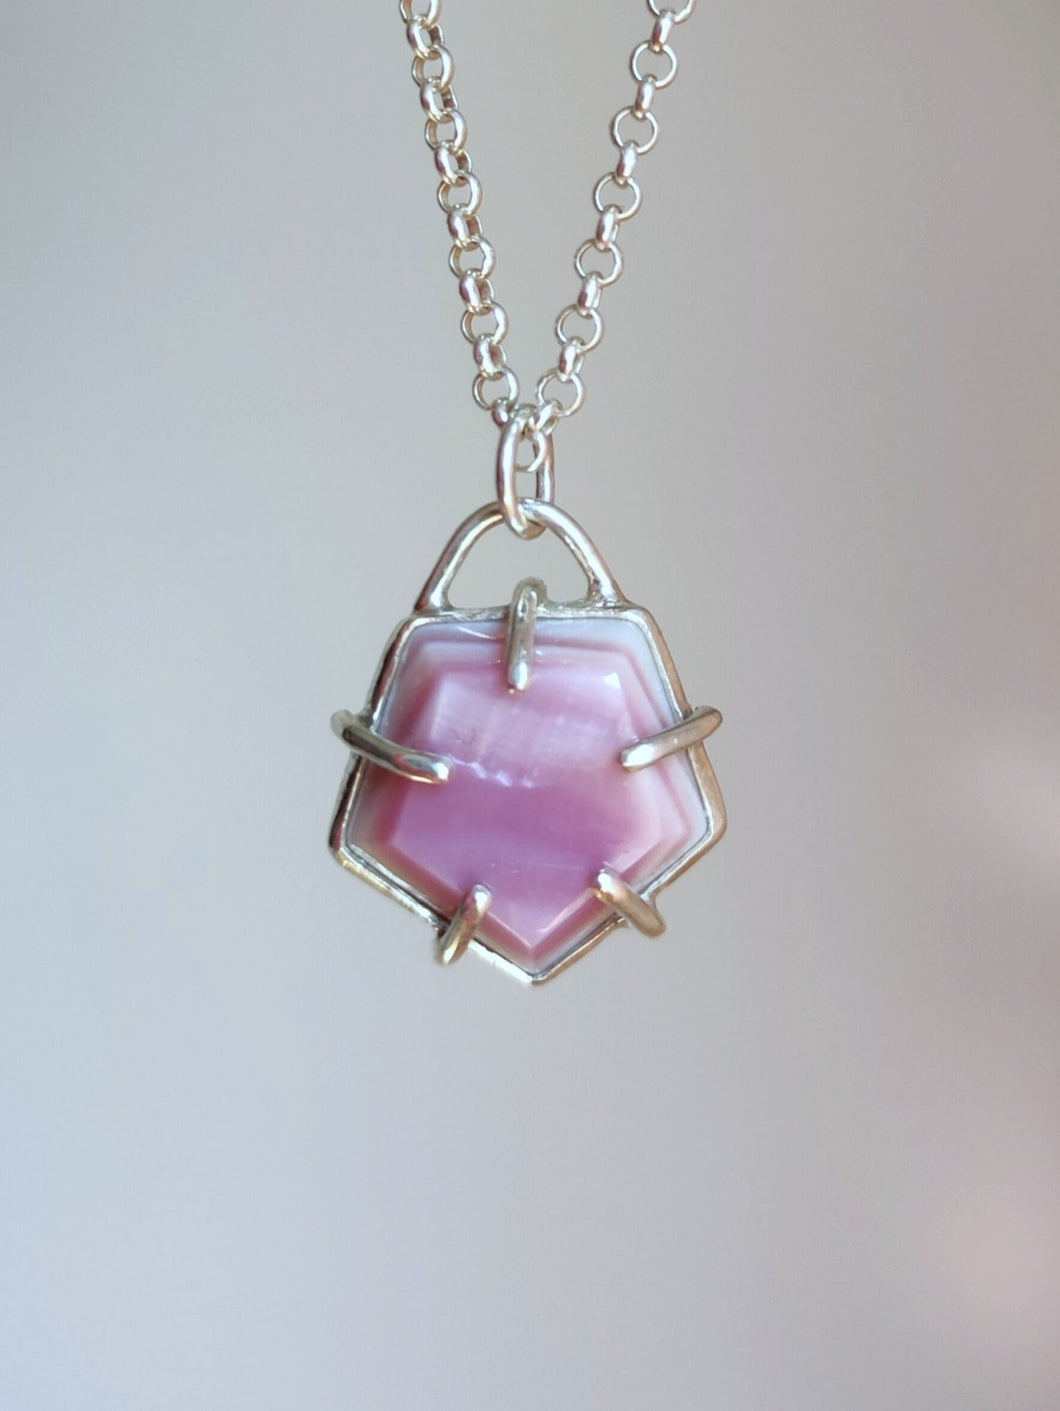 A Kathrin Jona Pentagon Mother of Pearl Necklace on a silver chain.